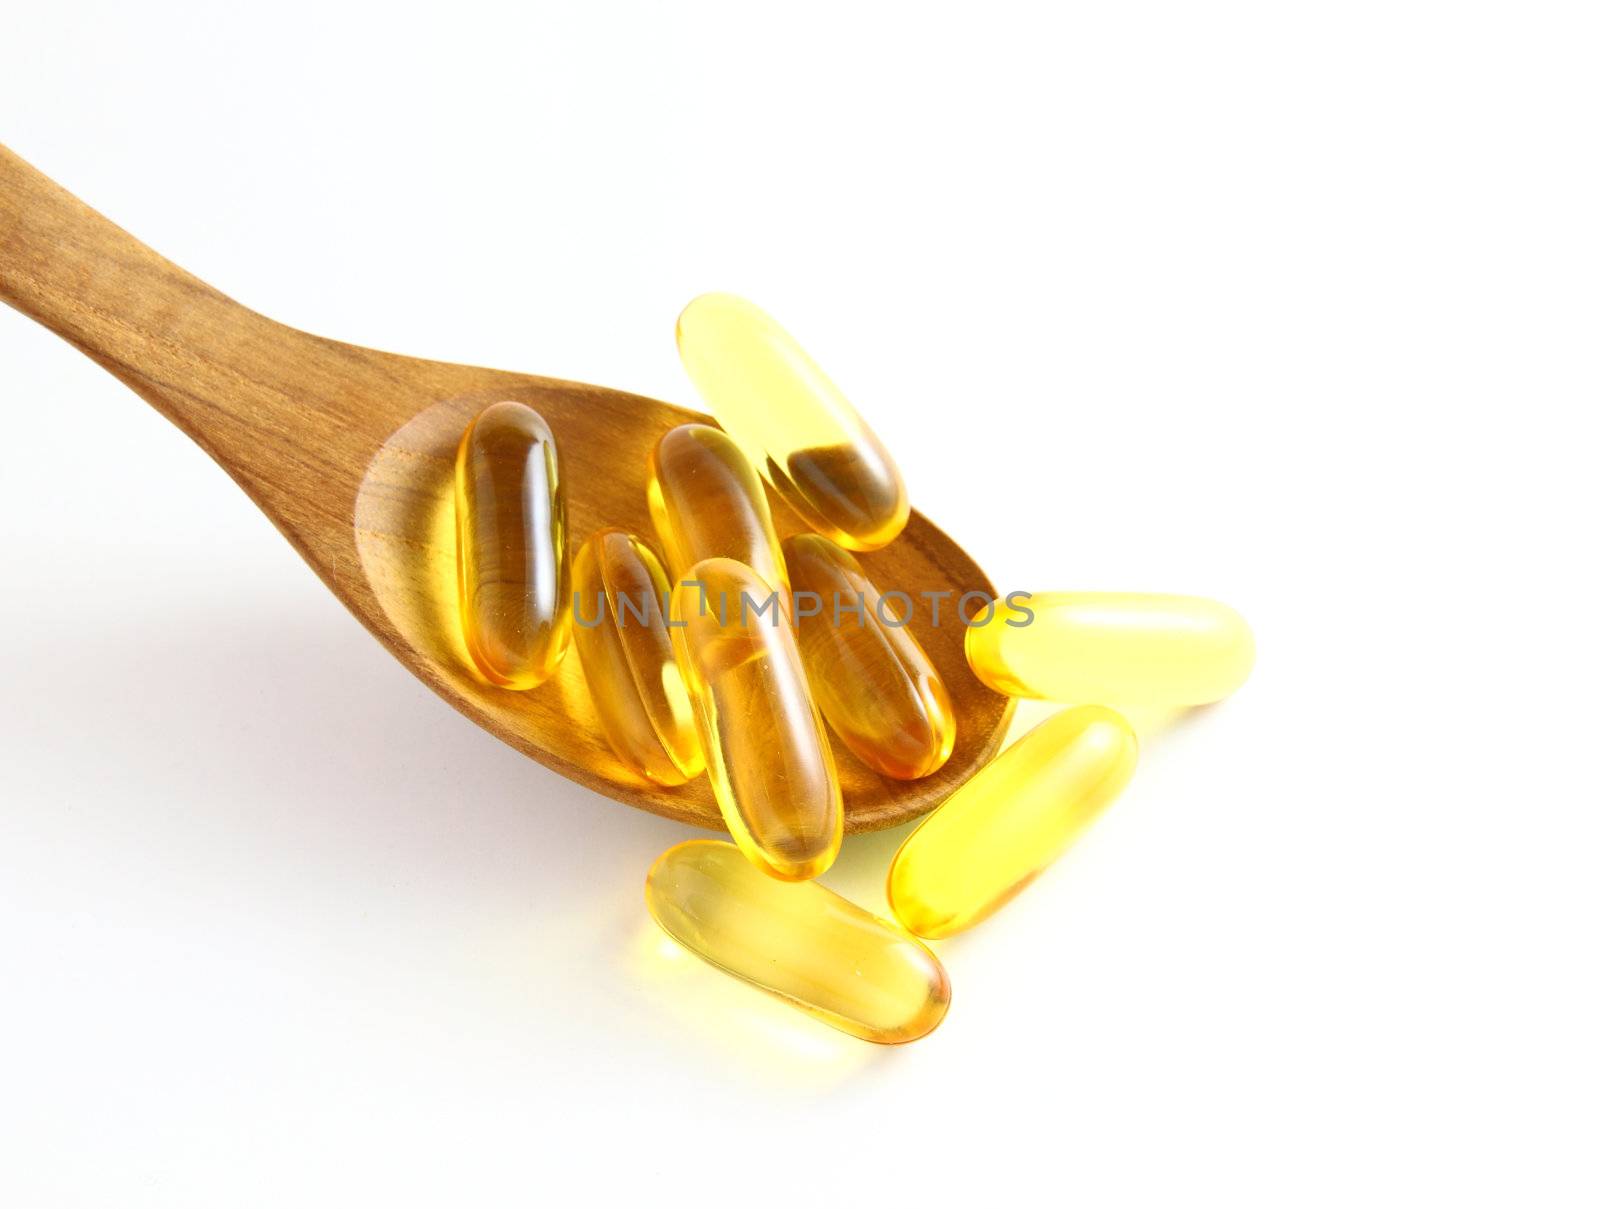 vitamins in wooden spoon on white background  by nuchylee